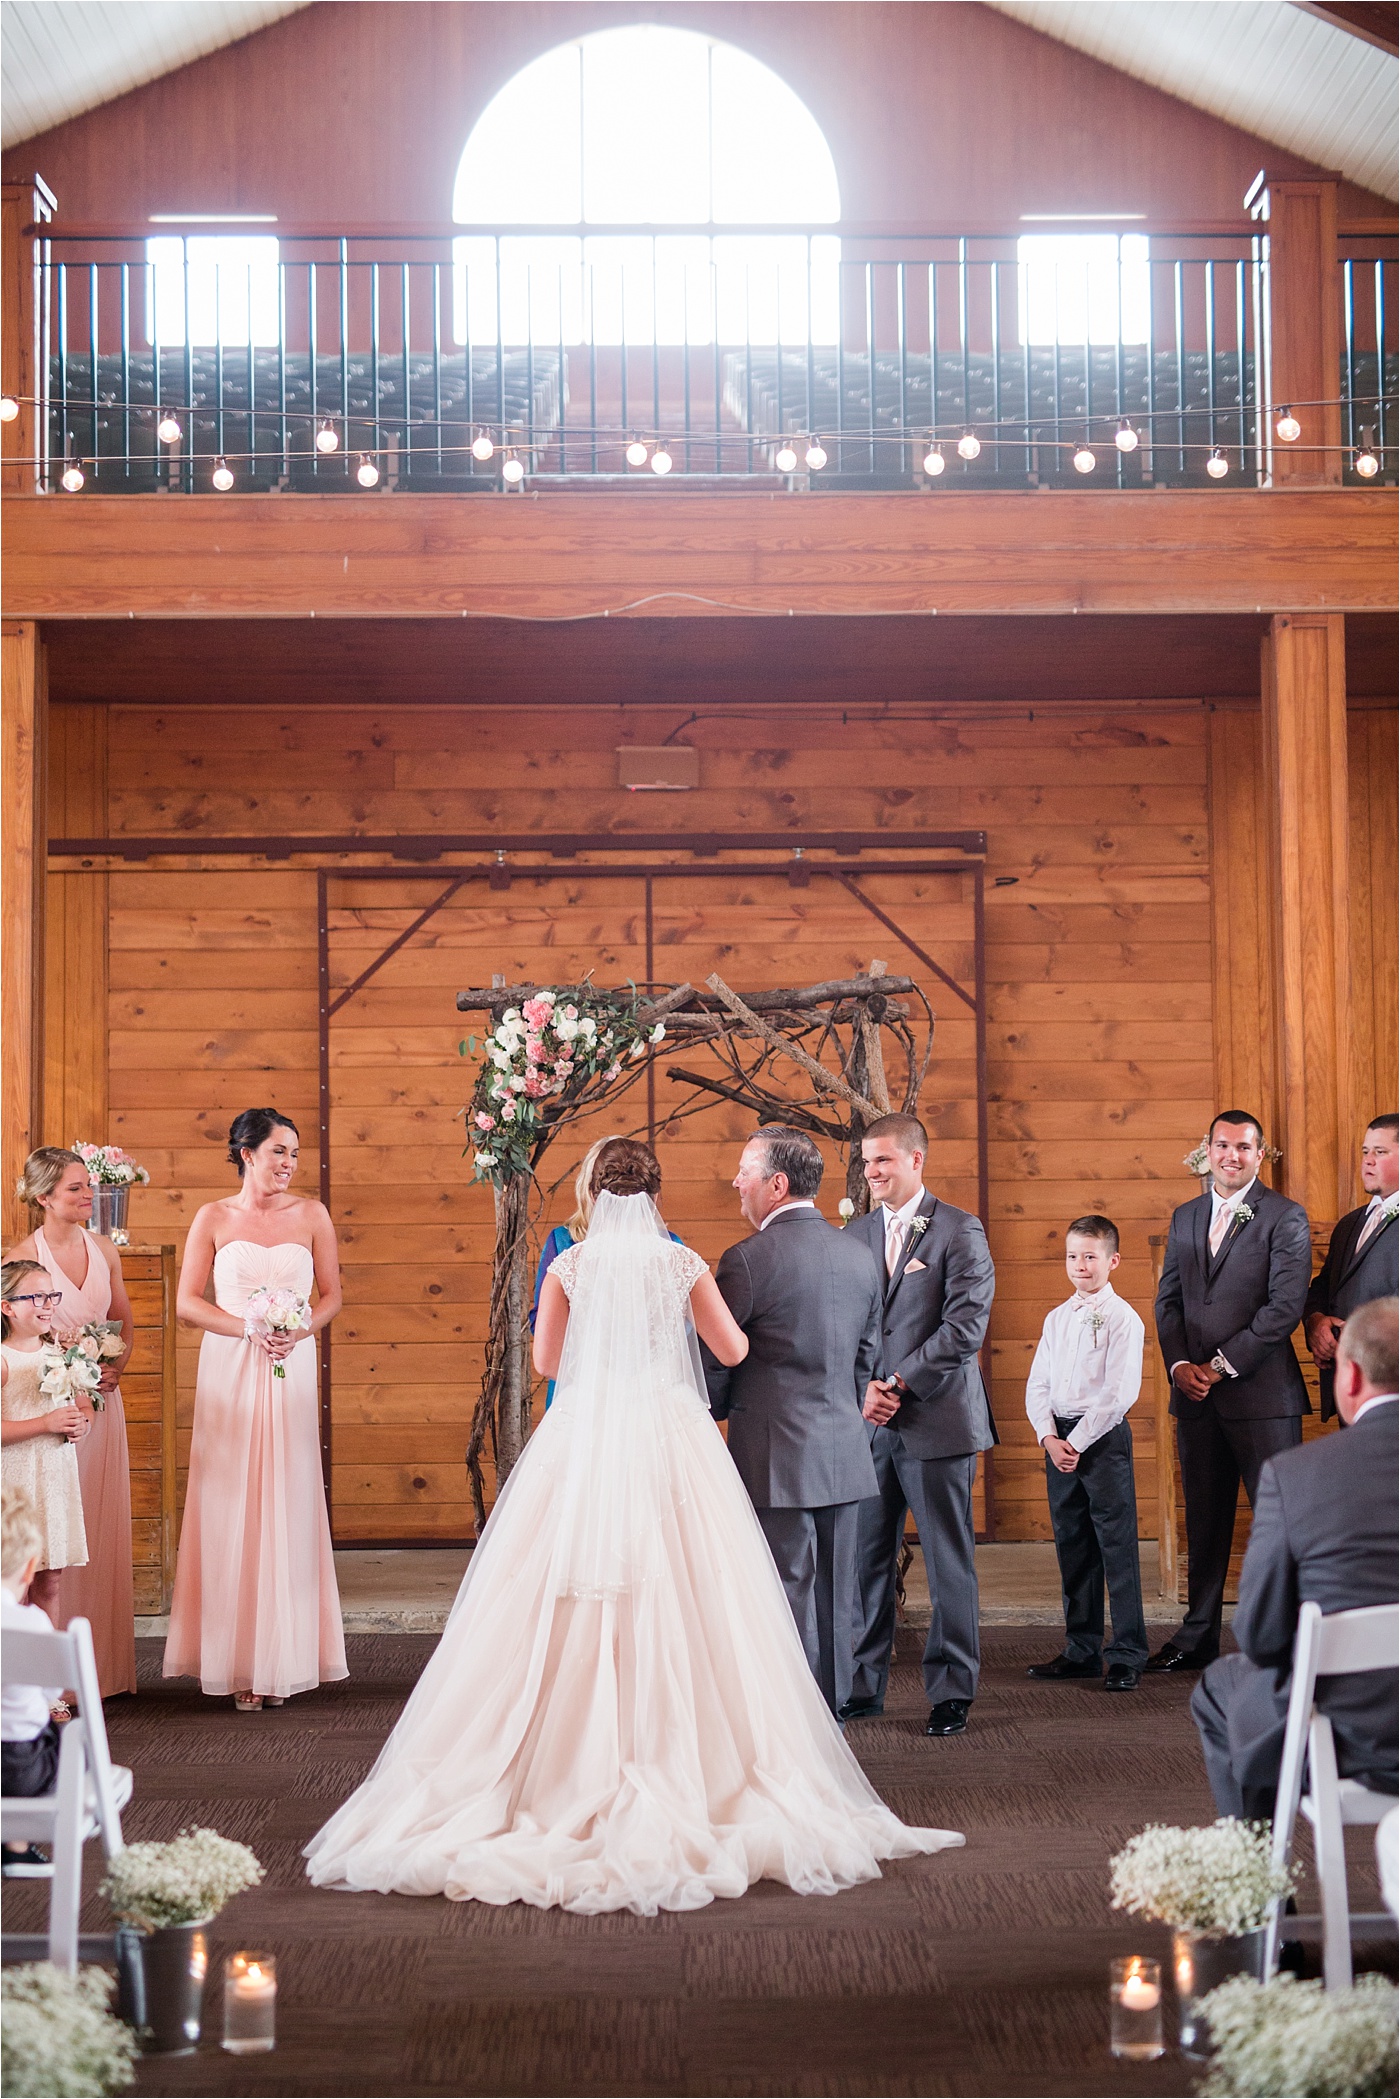 A Blush Outdoor wedding at Irongate Equestrian | KariMe Photography_0089